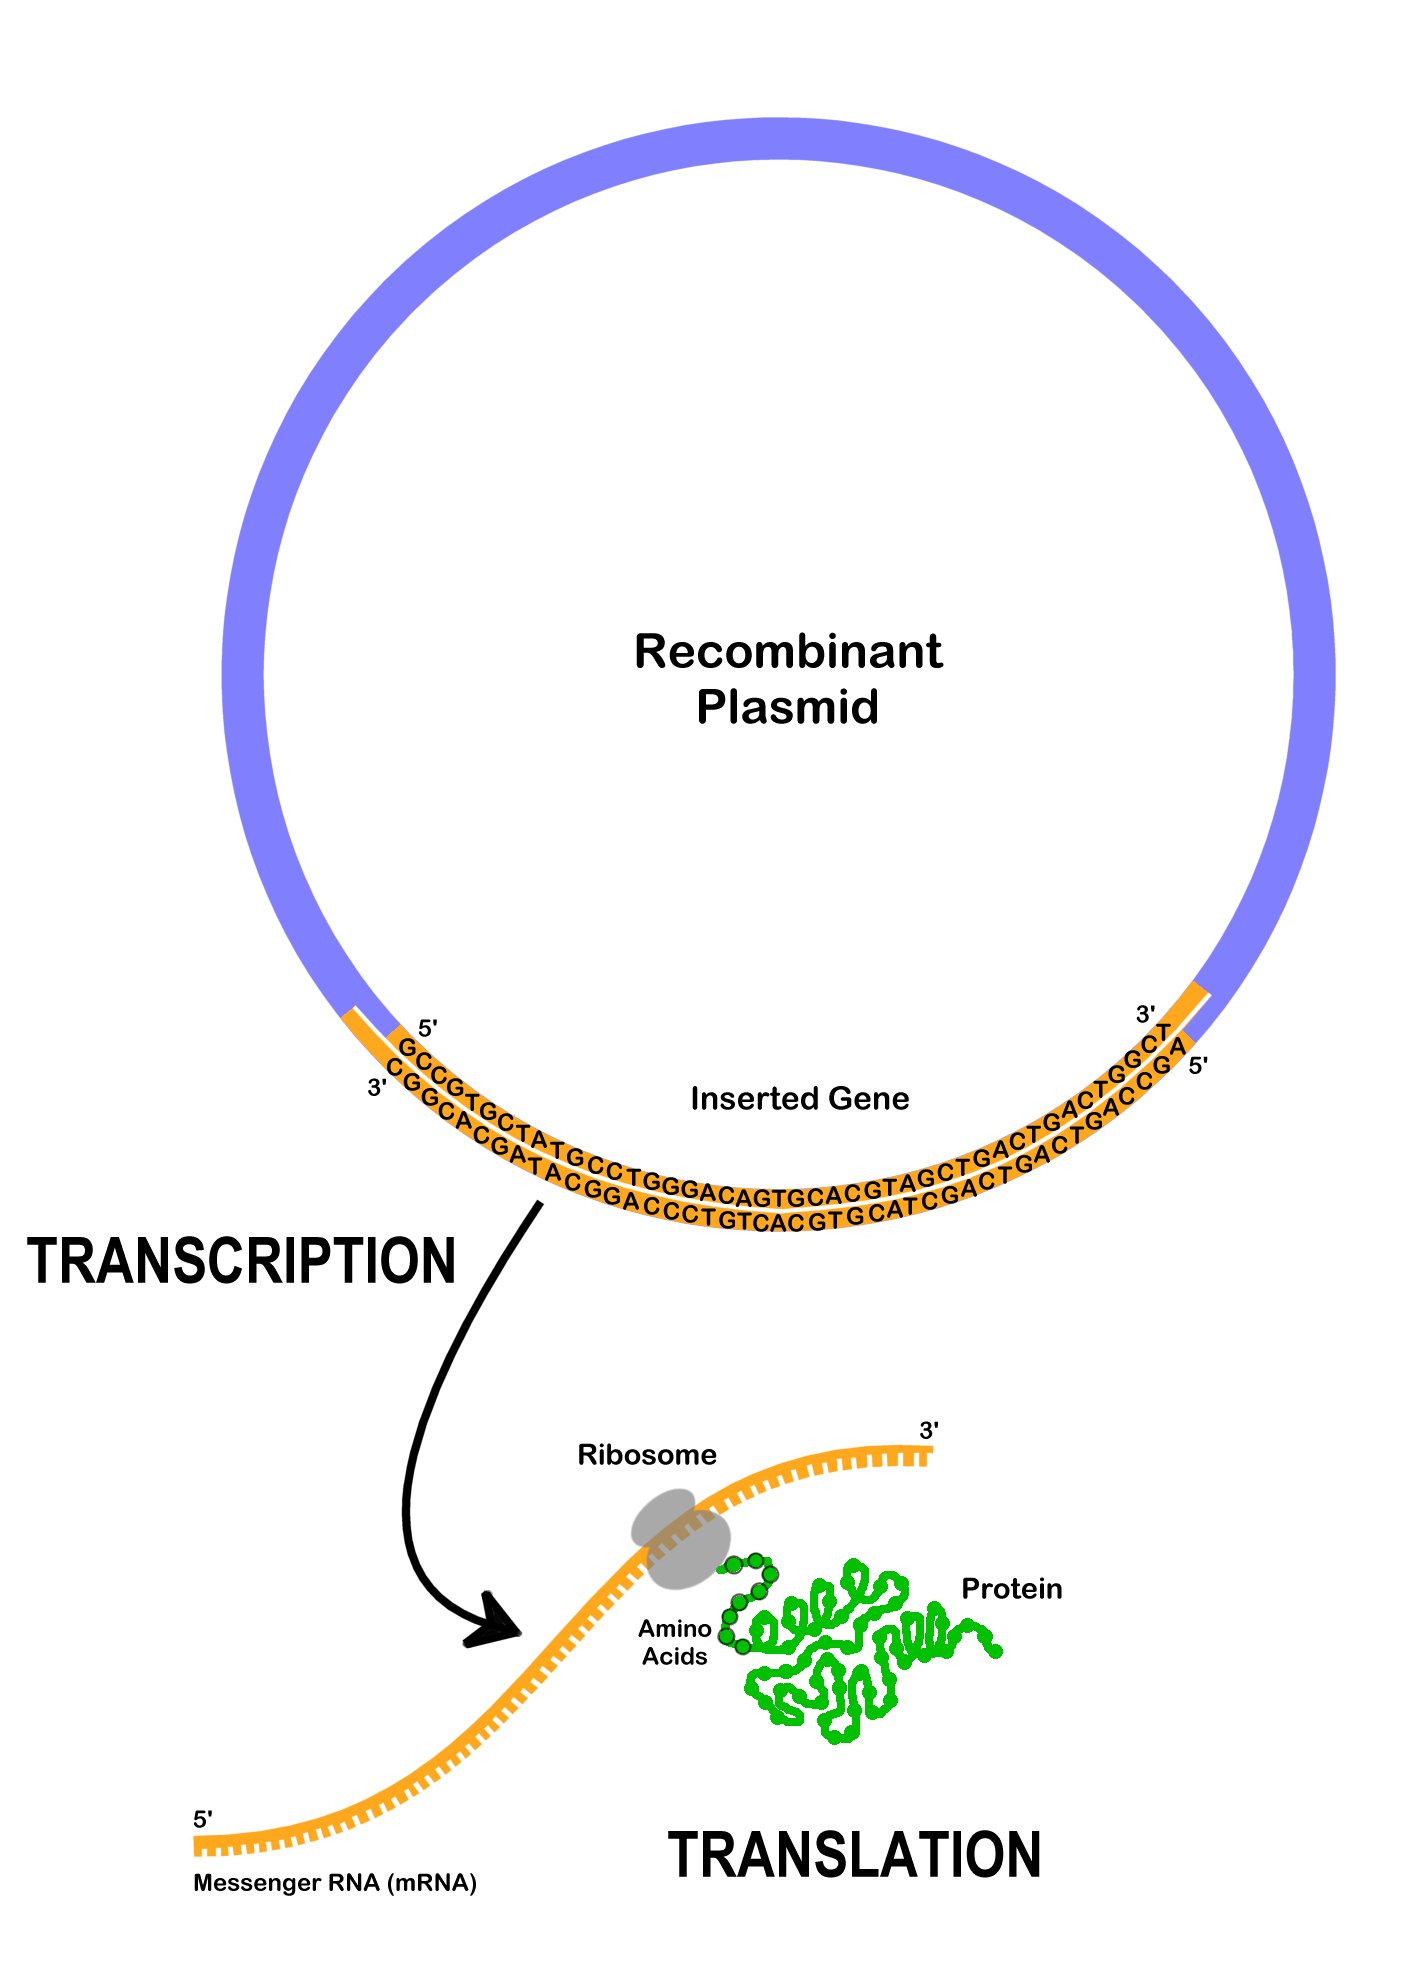 Drawing of a plasmid with inserted gene undergoing transcription to mRNA and translation to a protein.